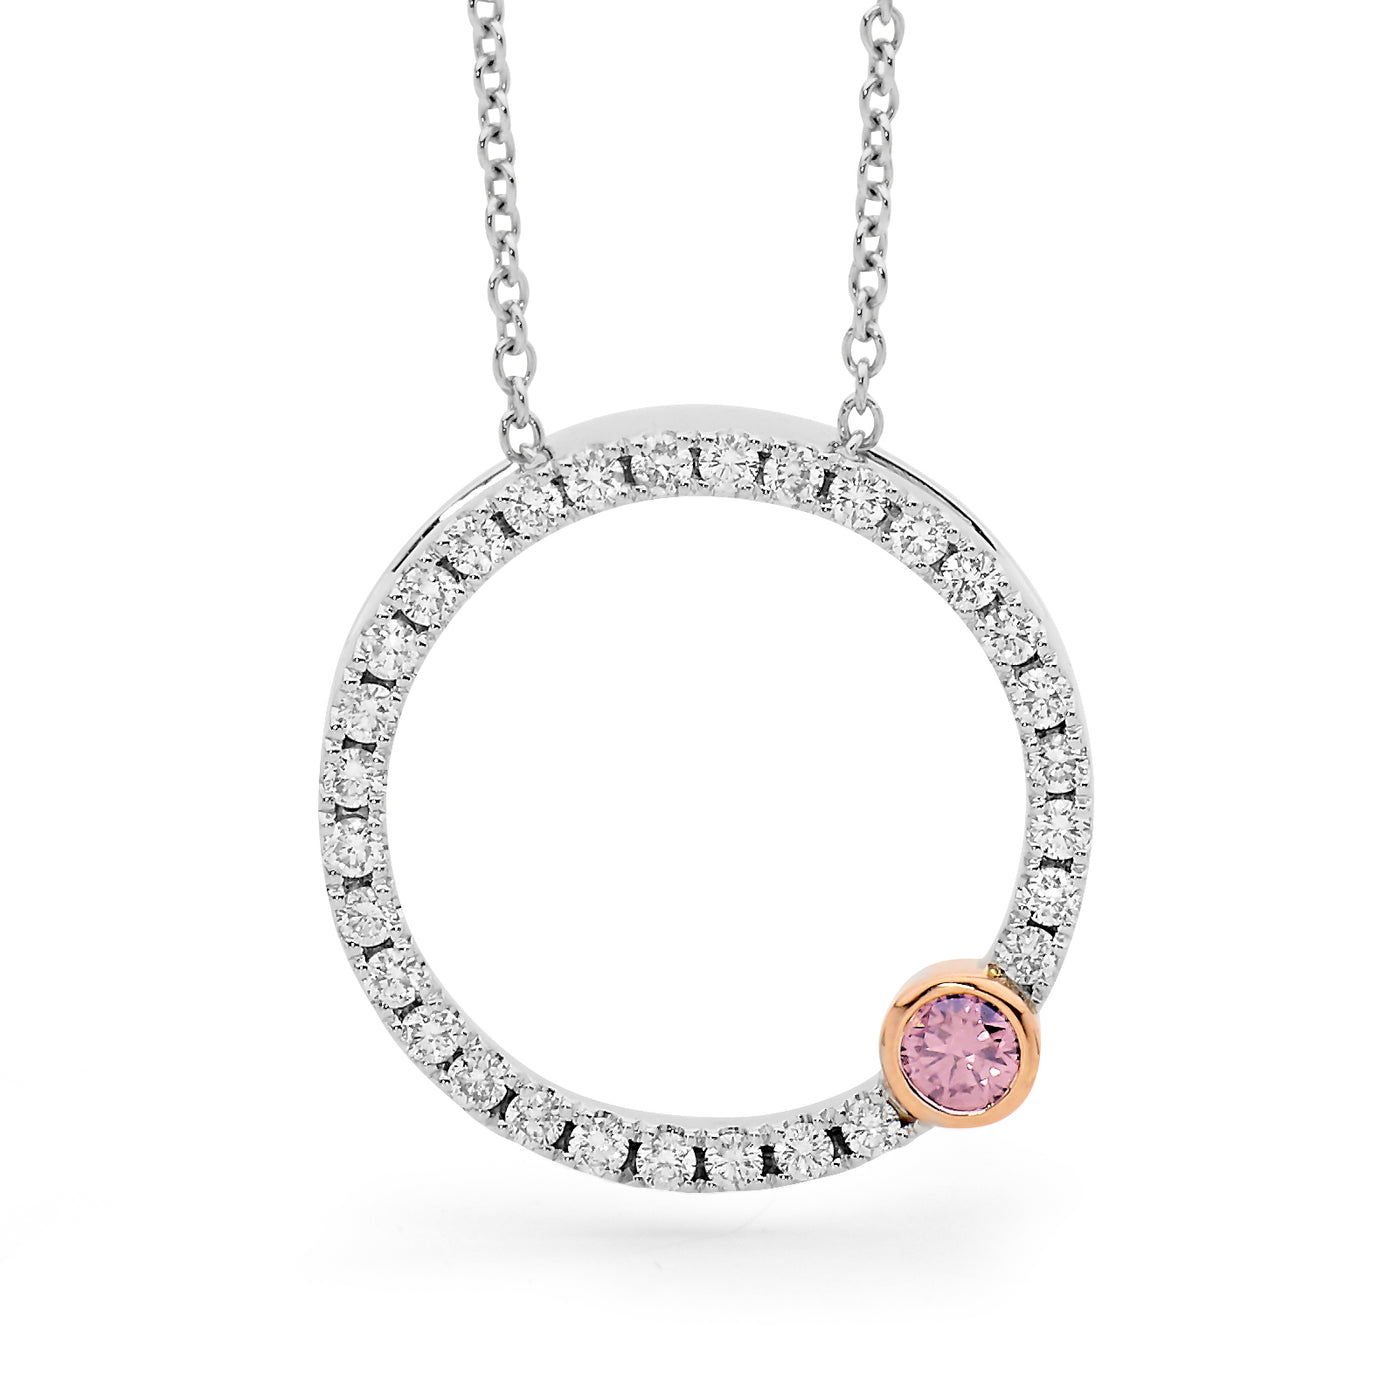 Ellendale 18Ct White Gold And Rose Gold Argyle White And Pink Diamond Circle Pendant